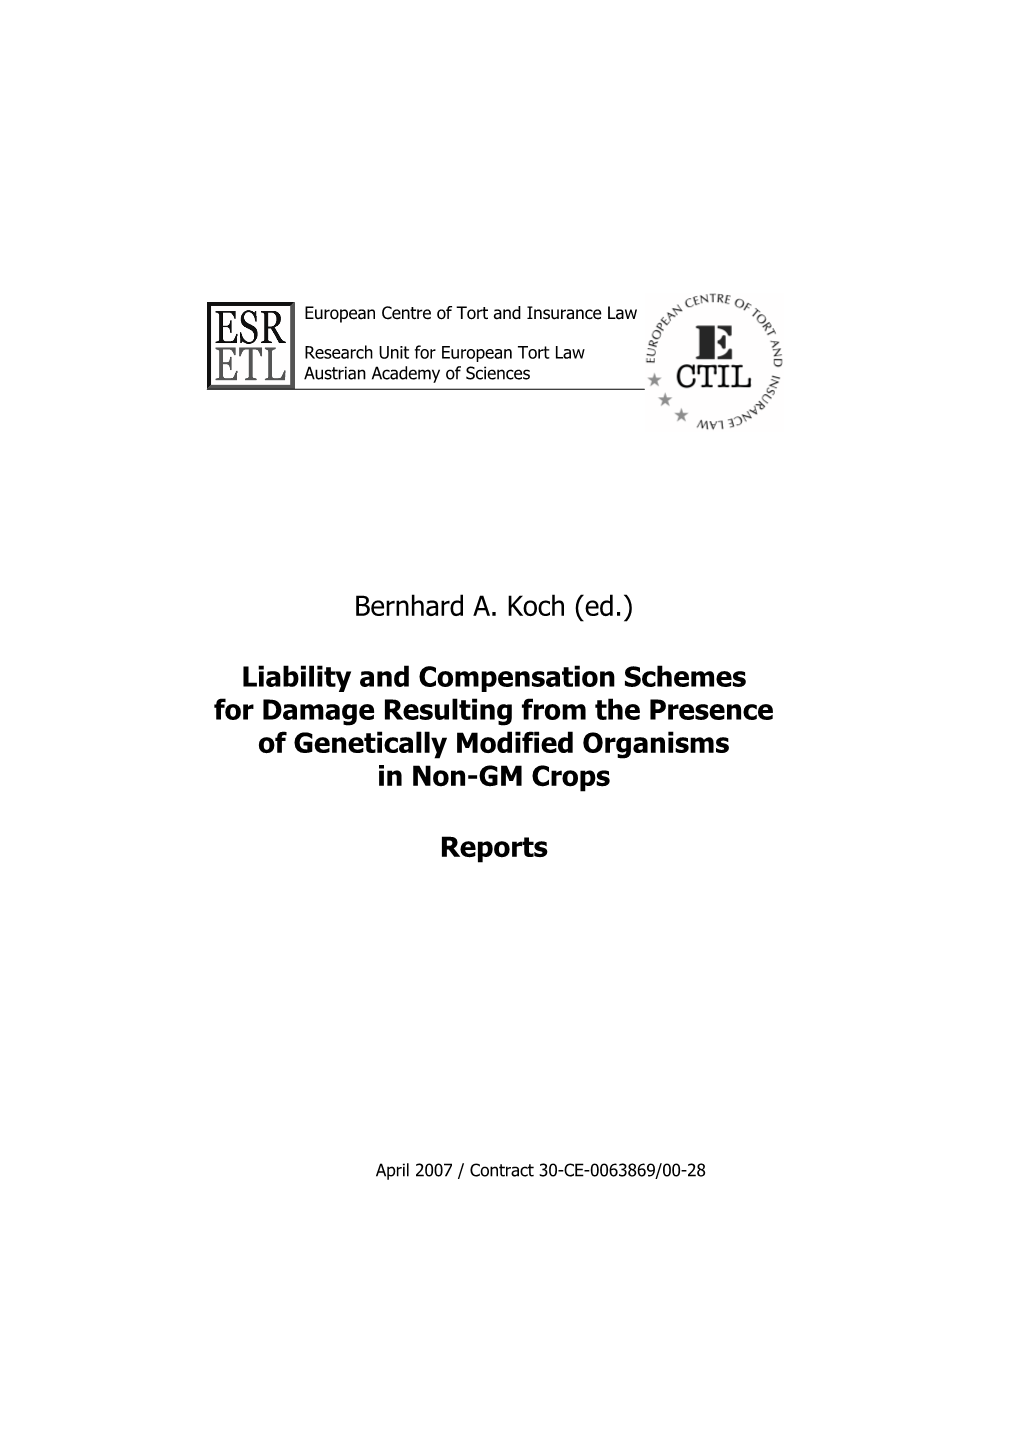 Liability for Gmos: Reports 10 Table of Contents